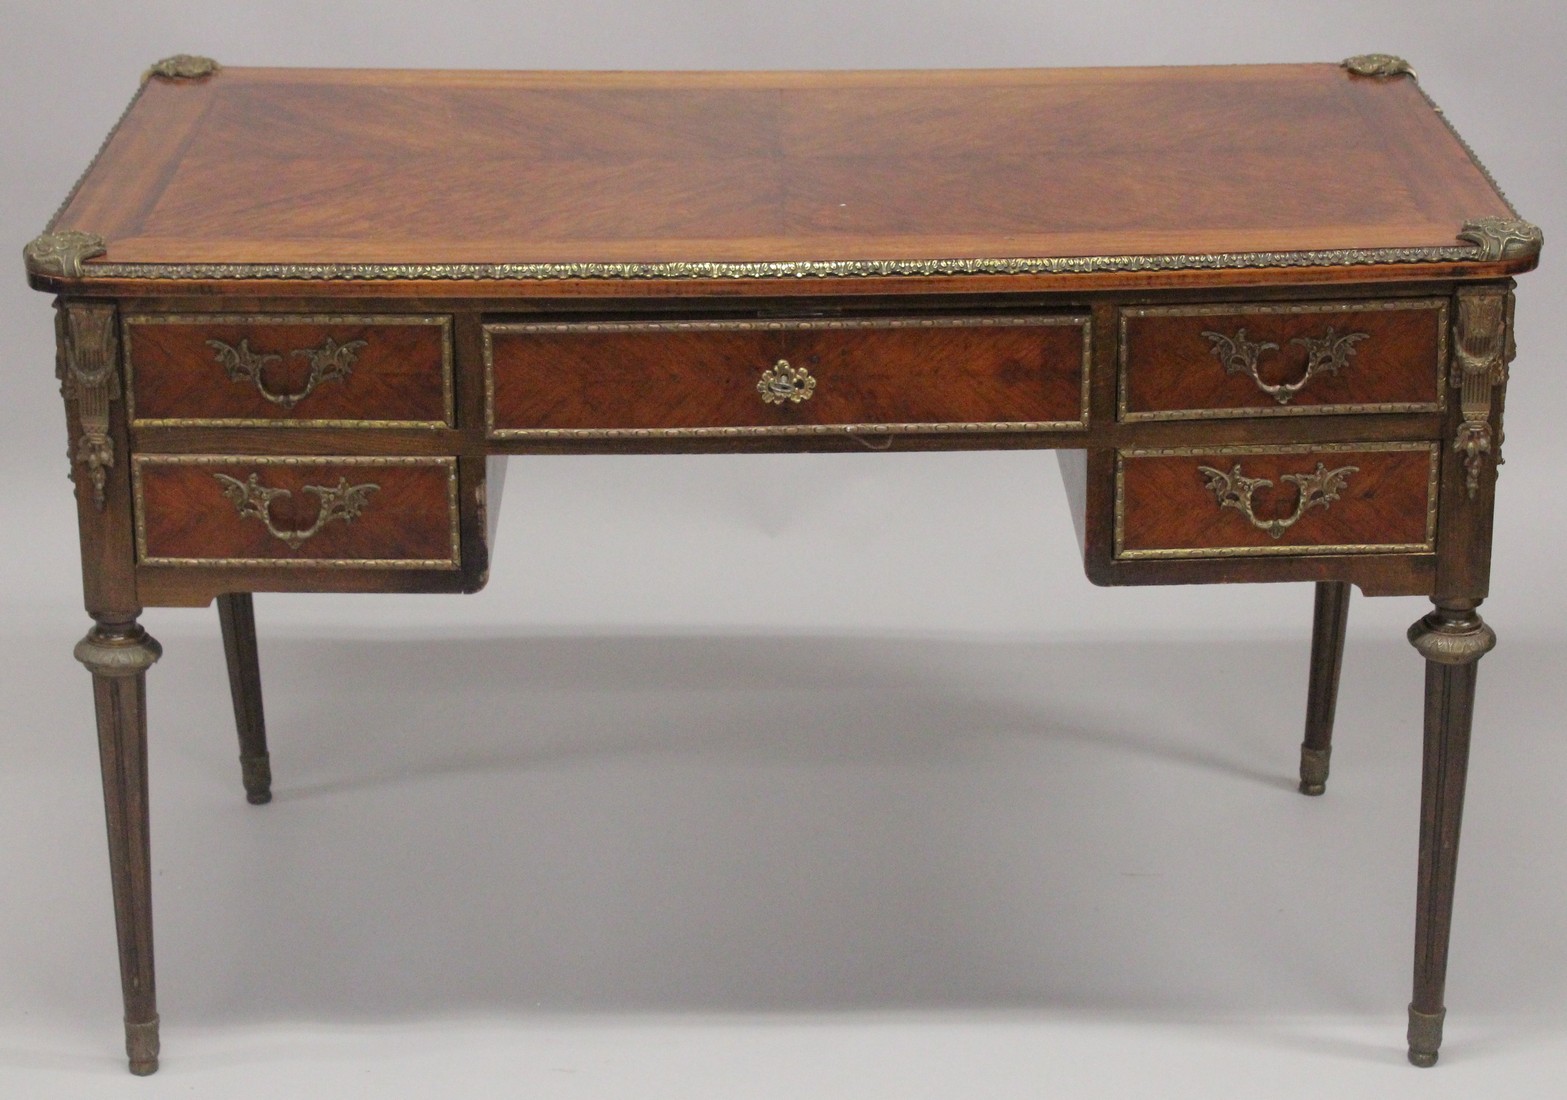 A LOUIS XVITH DESIGN WRITING TABLE with wooden top, five drawers on turned legs with ormolu